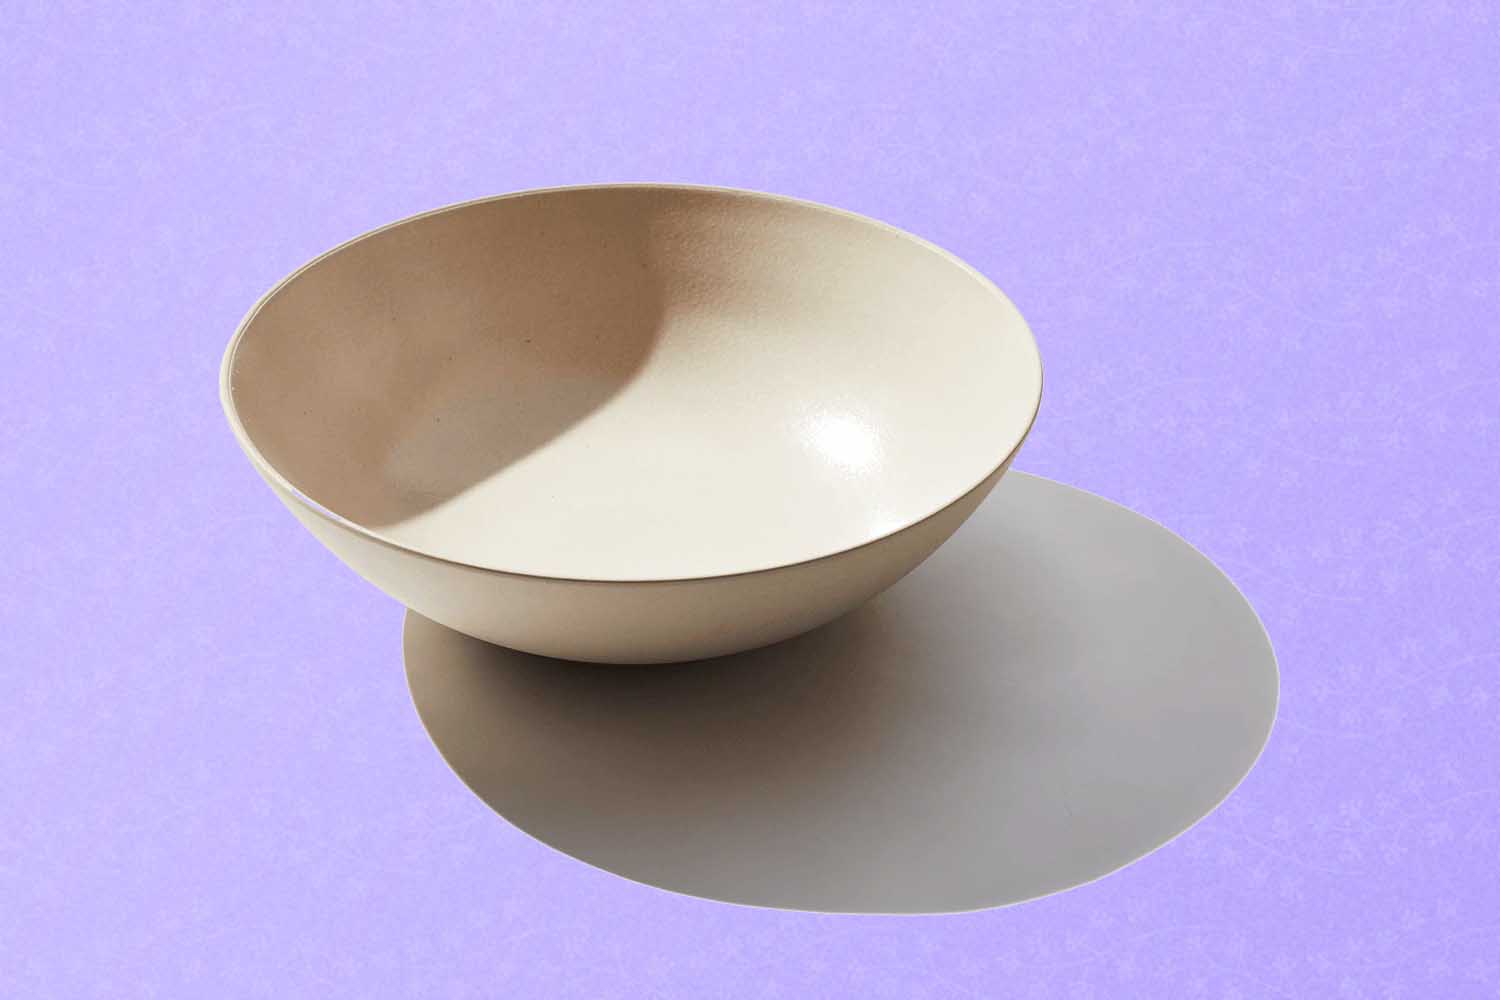 A ceramic serving bowl, a perfect Mother's Day gift for 2022, on a purple background.